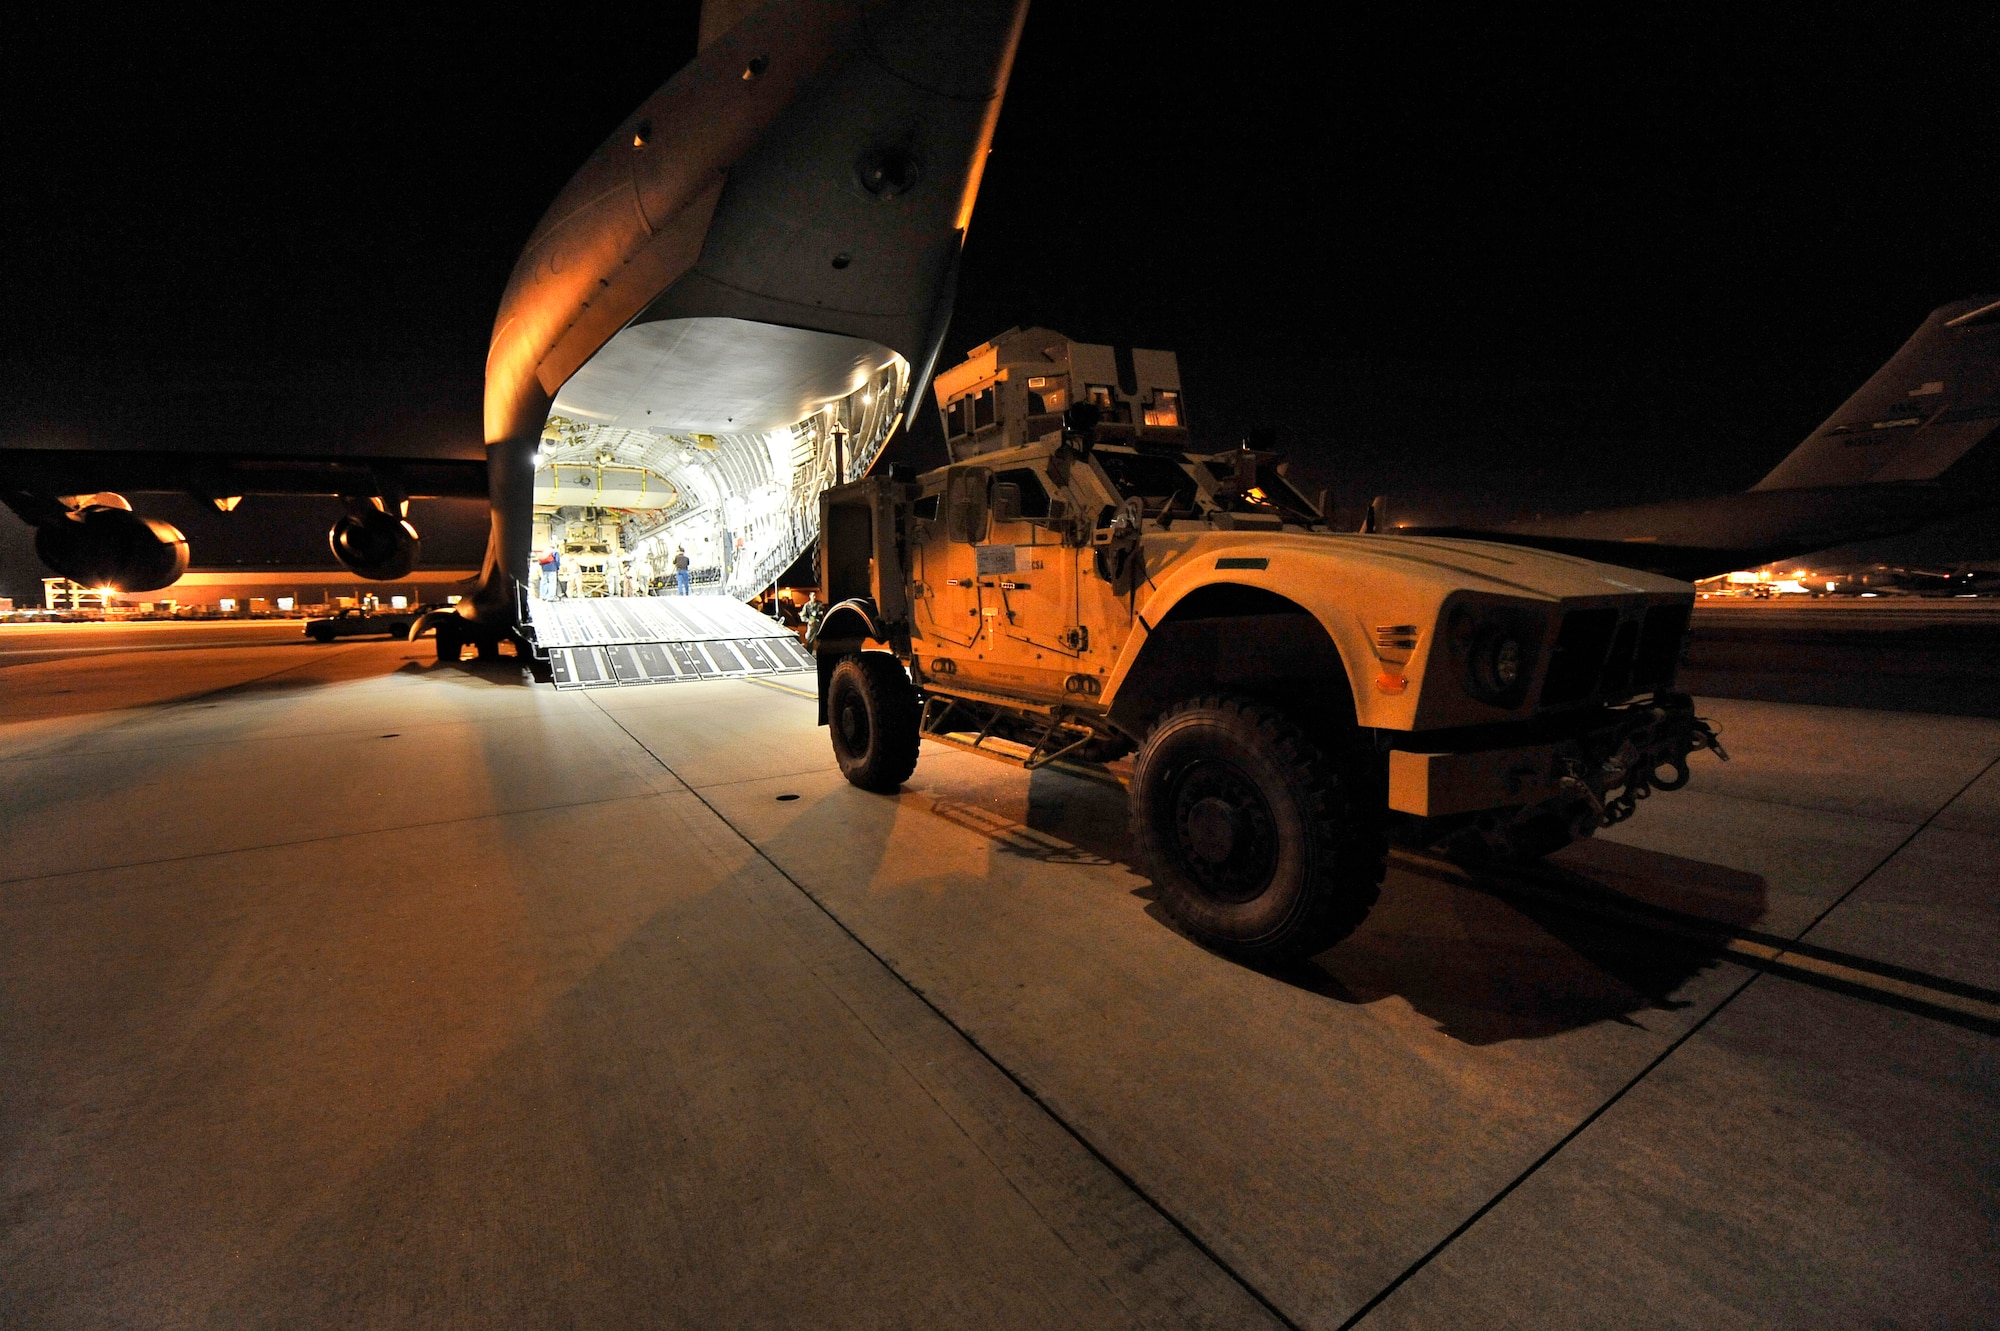 One of two mine-resistant, ambush-protected all-terrain vehicles, or M-ATVs, is loaded onto a C-17 Globemaster III at Charleston Air Force Base, S.C., Sept. 30, 2009.  The two M-ATVs are the first to be delivered to the Afghanistan theater for operational use.  The C-17 is based out of McChord AFB, Wash. (U.S. Air Force photo/James M. Bowman)